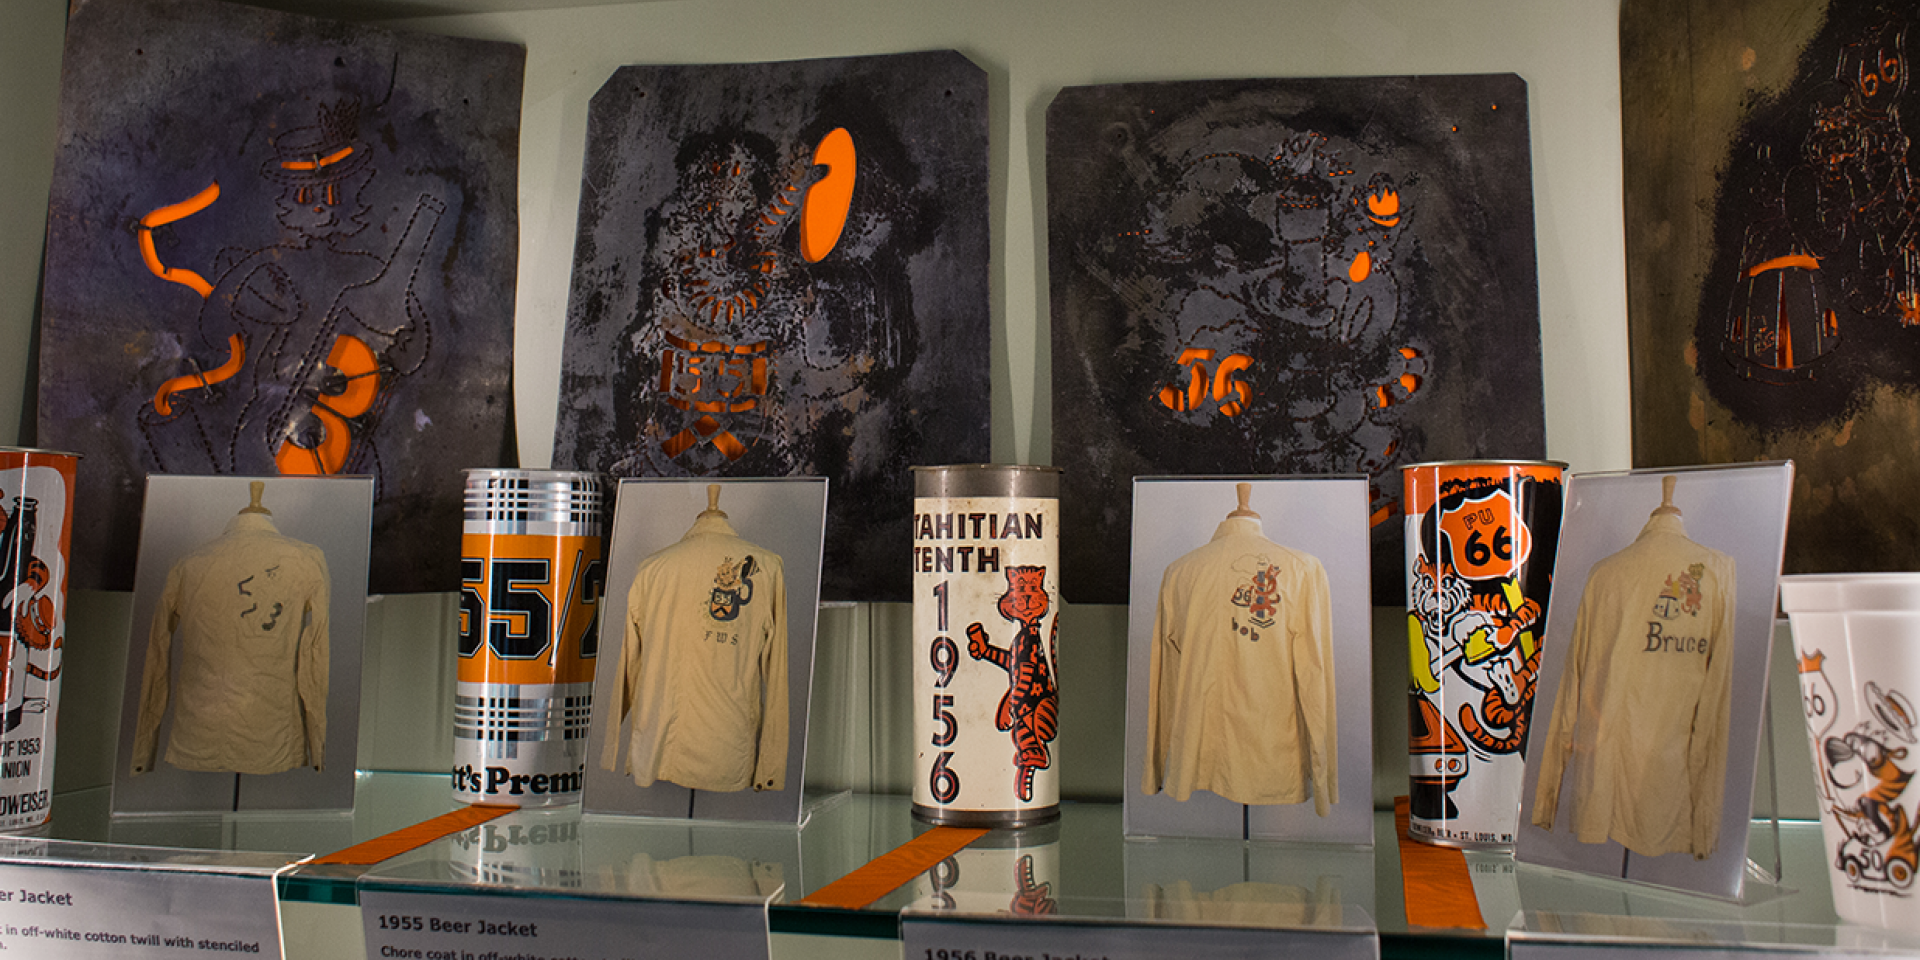 Historical items from Reunions